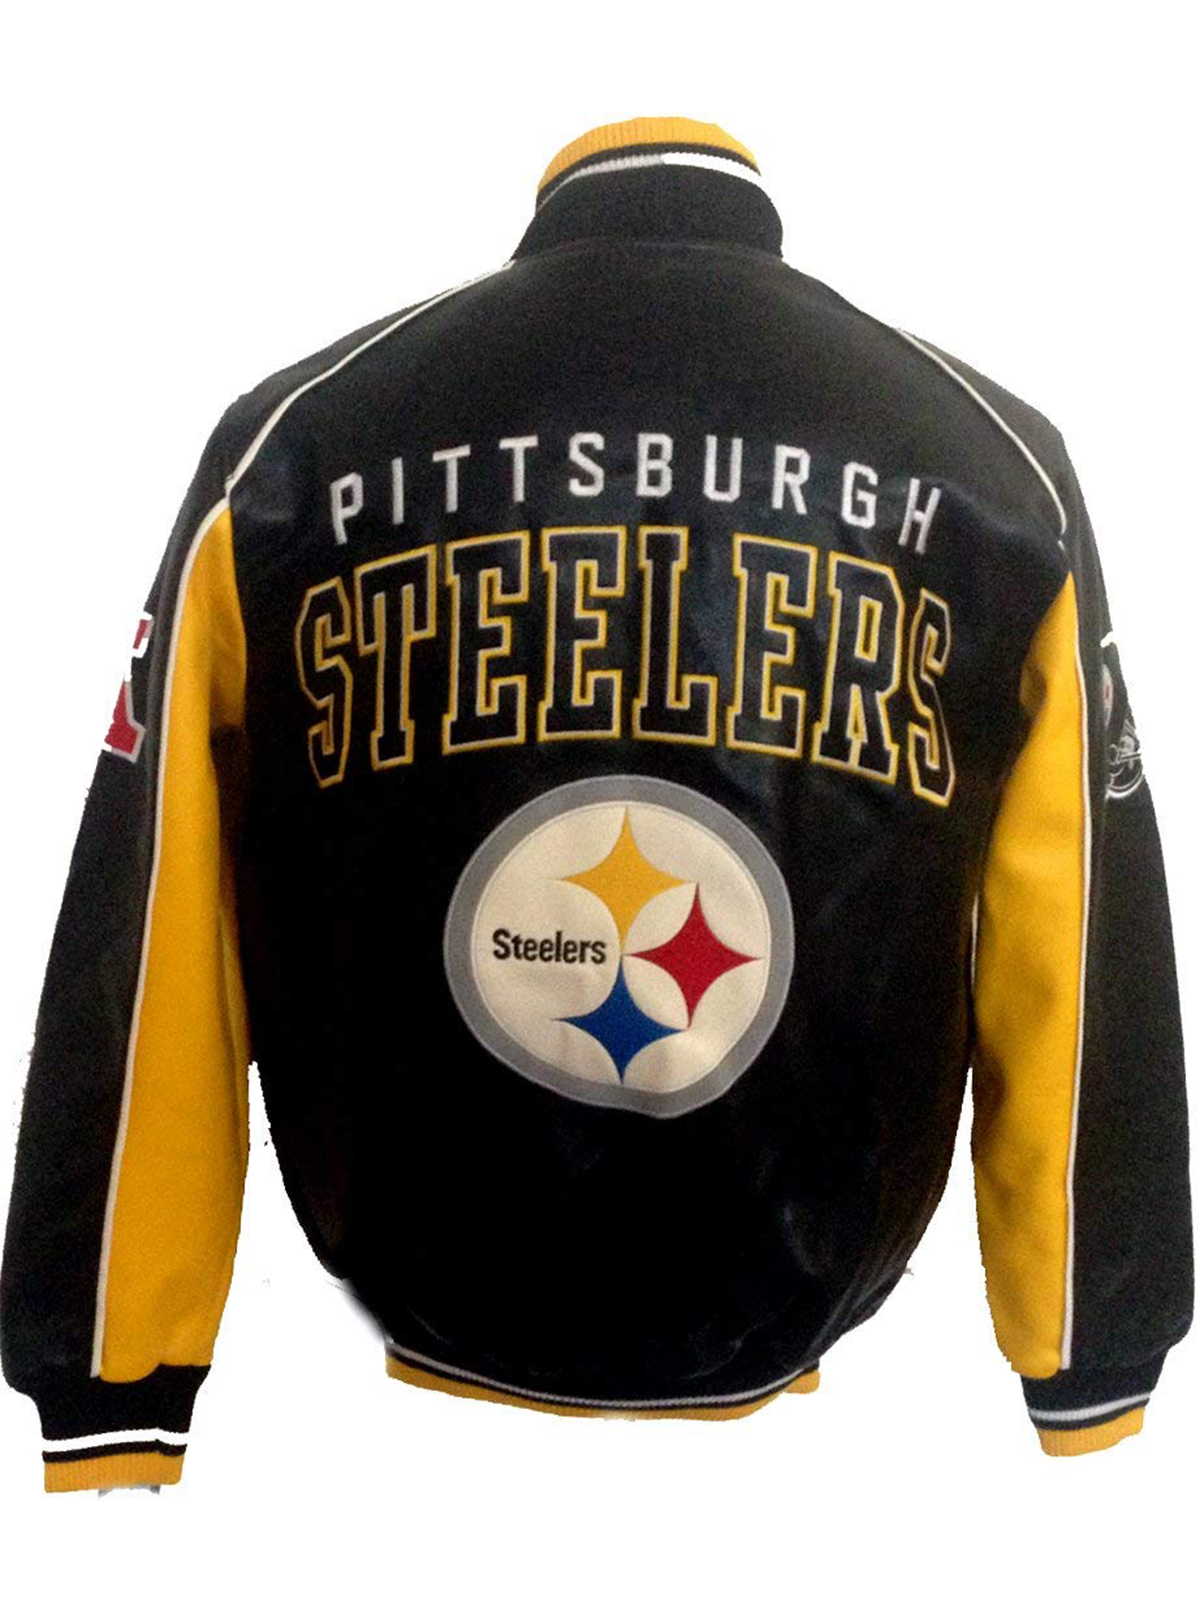 Pittsburgh NFL Steelers Leather Jacket